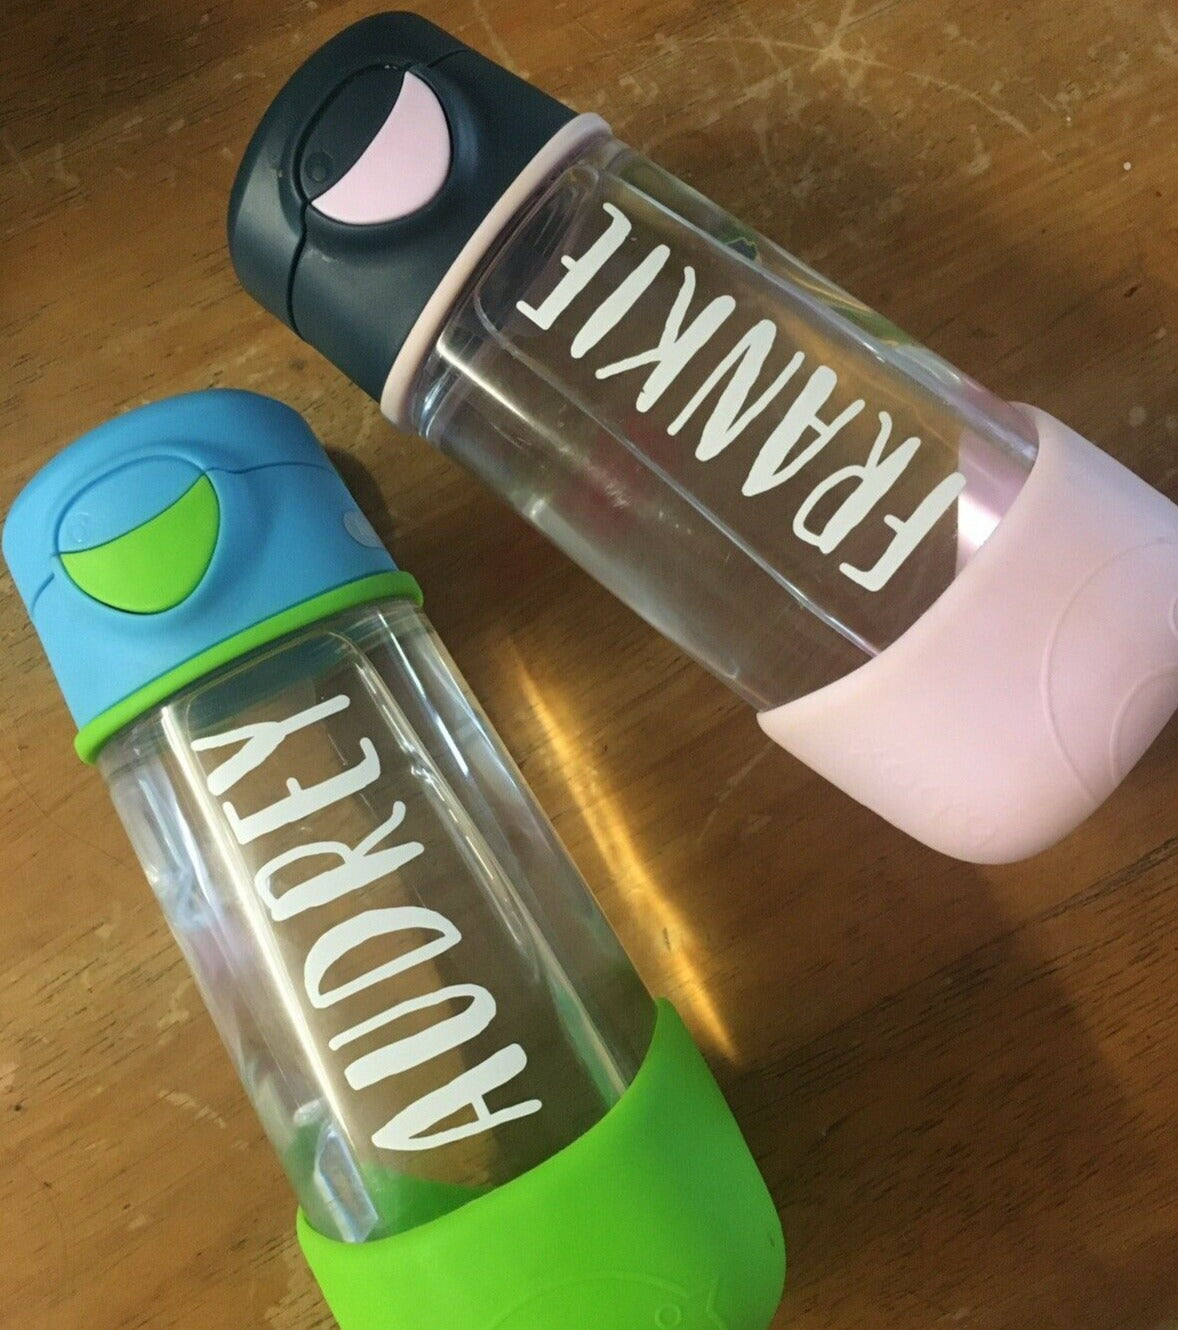 Single Name Decals, Personalized Stickers for Water Bottle, Gym, Sports, School, Bike etc - My Crafty Dog